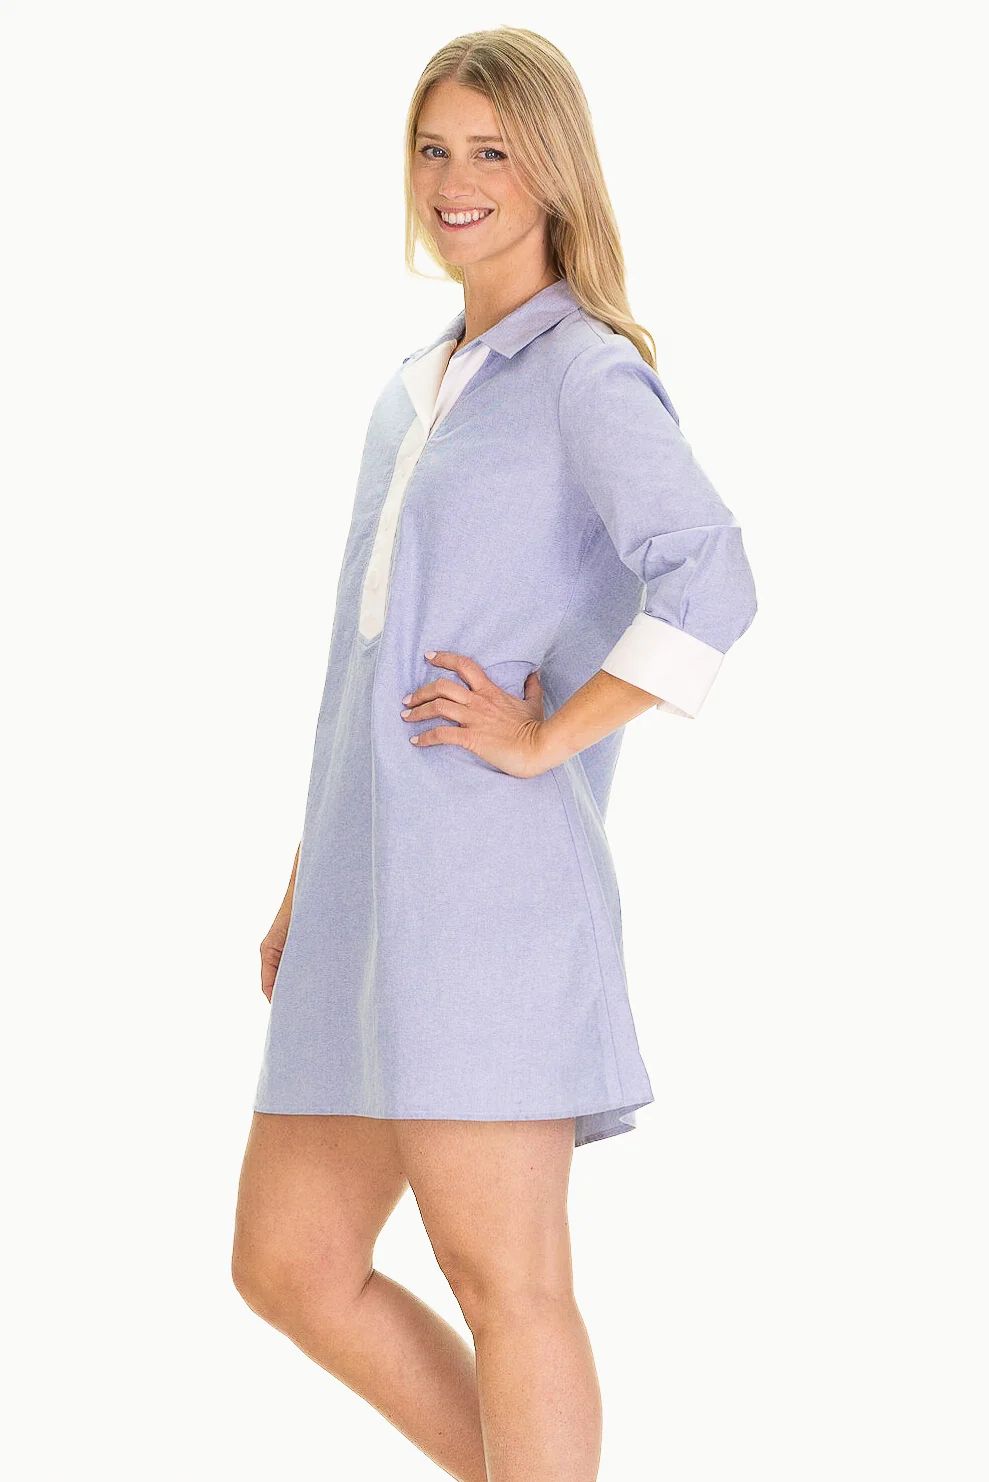 The Raleigh Collared Dress in Blue Oxford | Duffield Lane